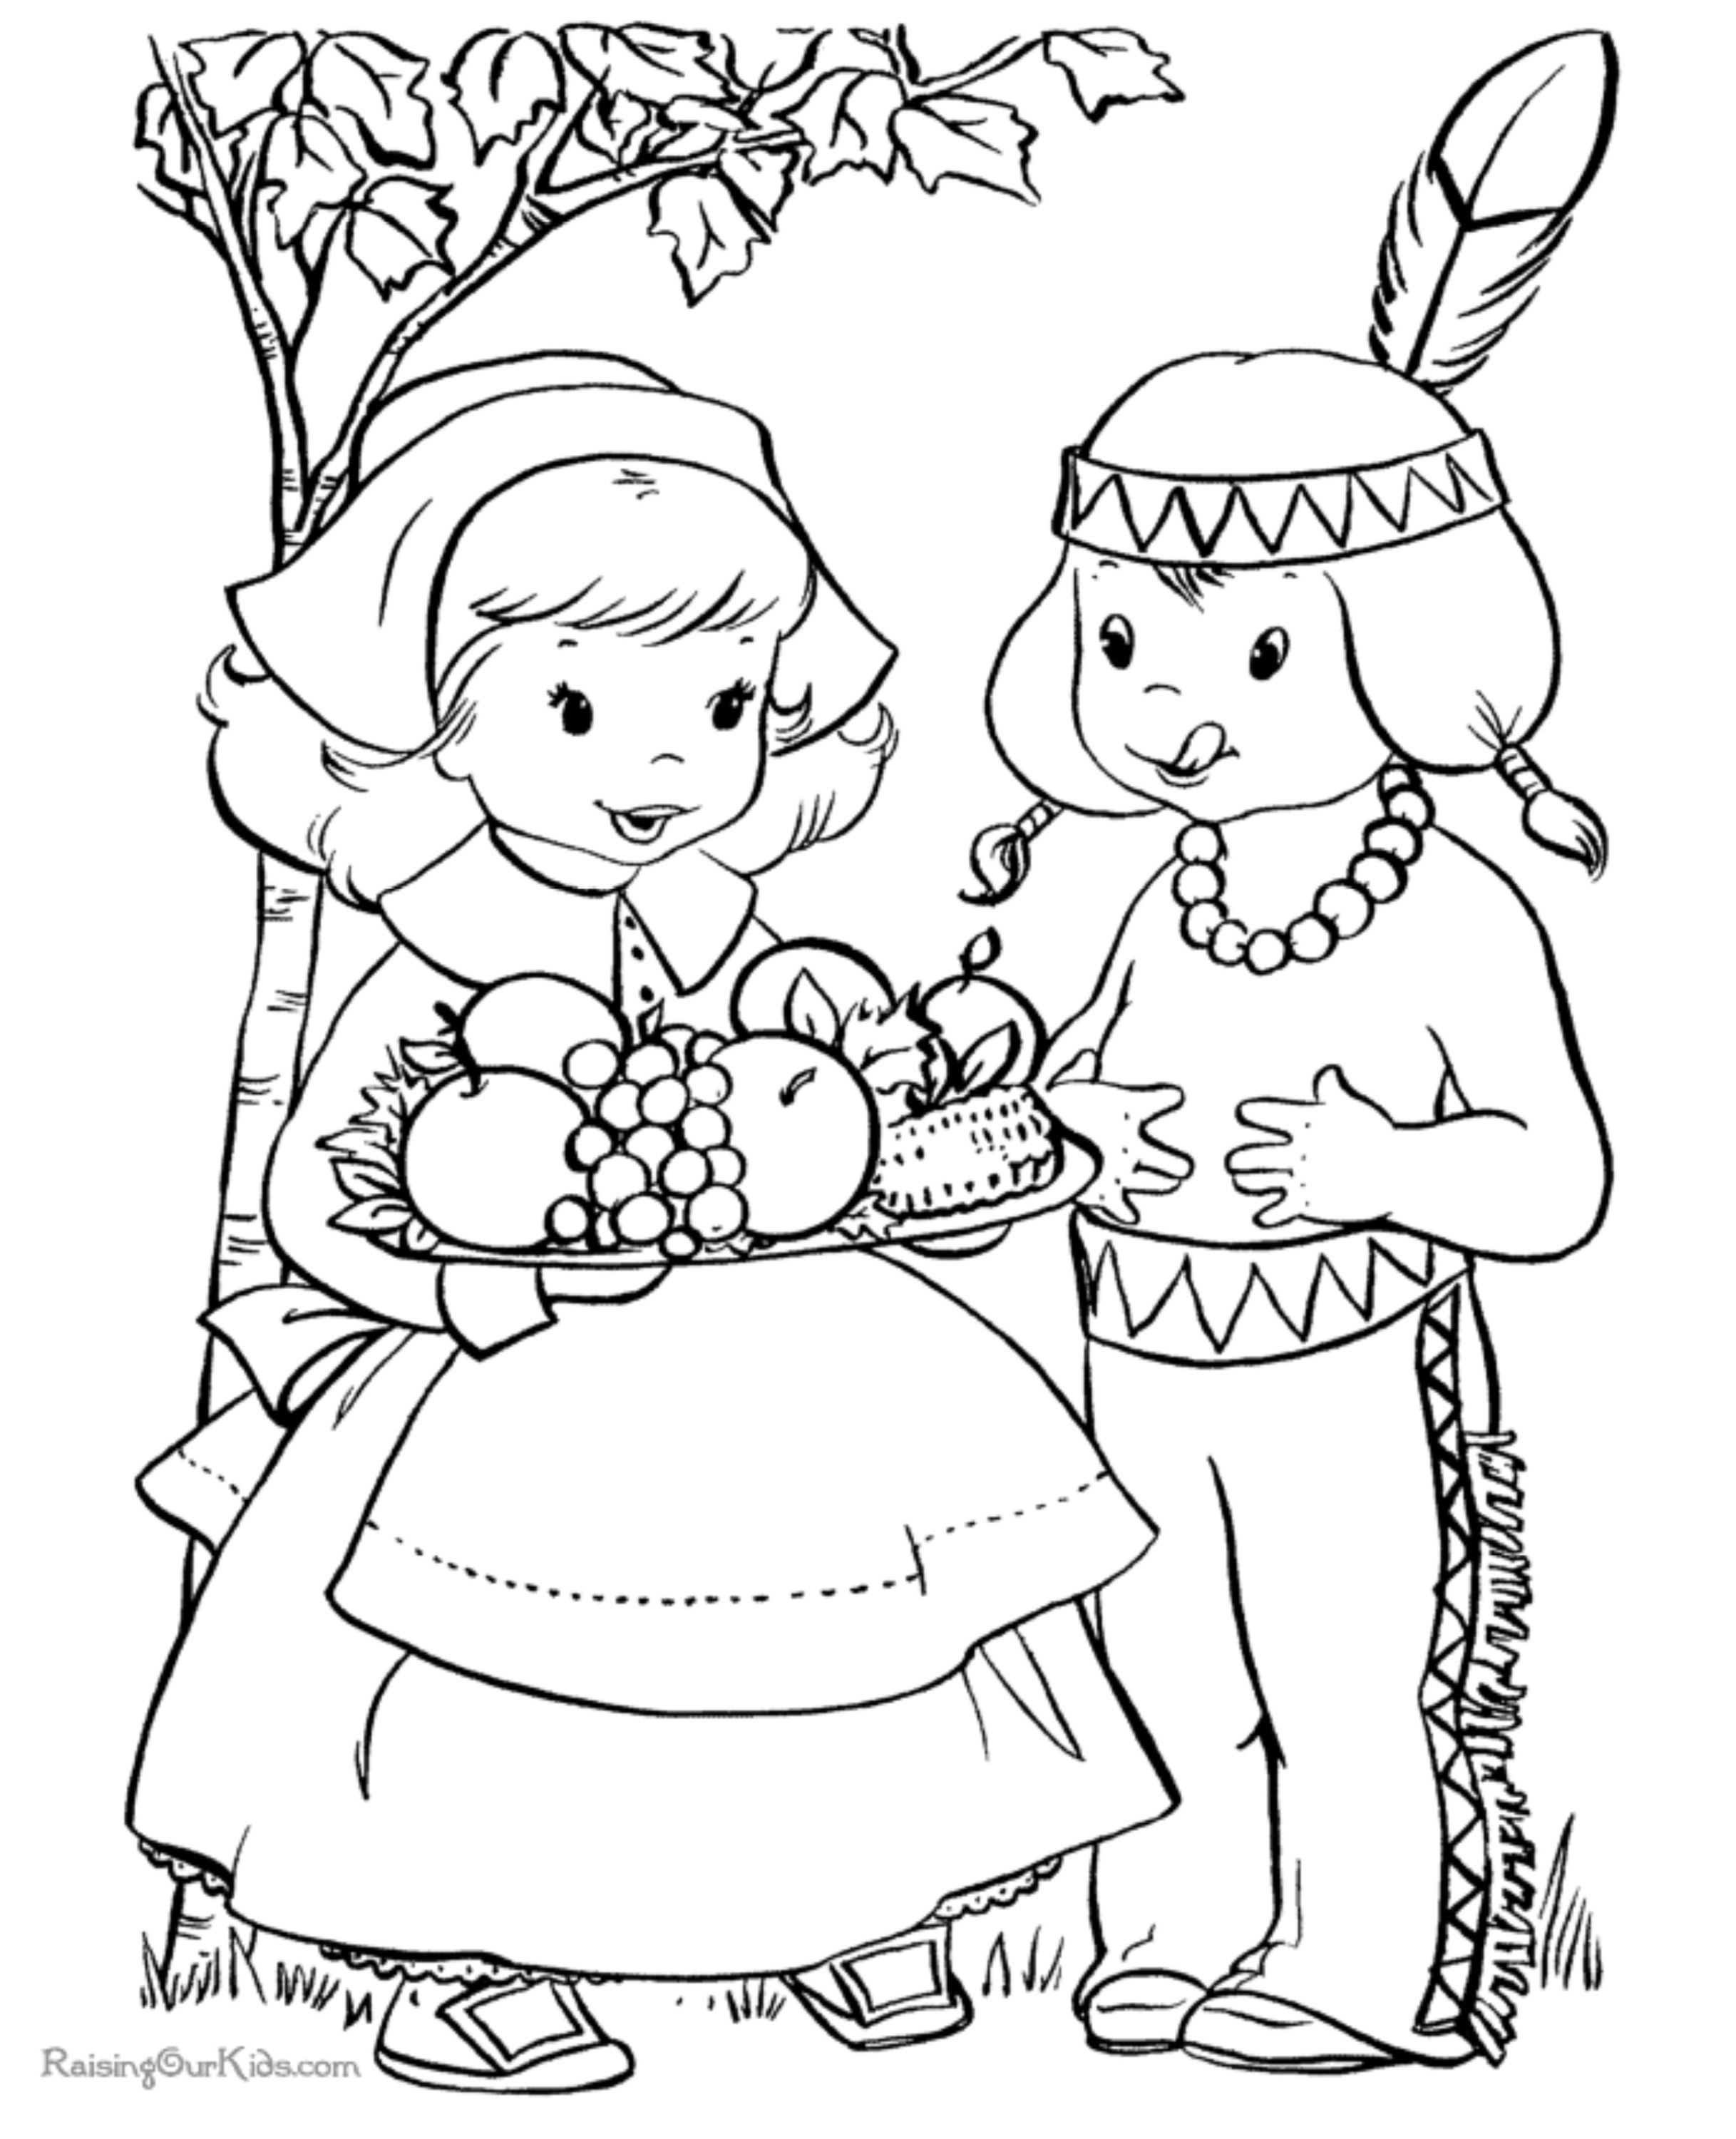 Thanksgiving Turkey Coloring Pages
 Kid’s Coloring Pages Northern News